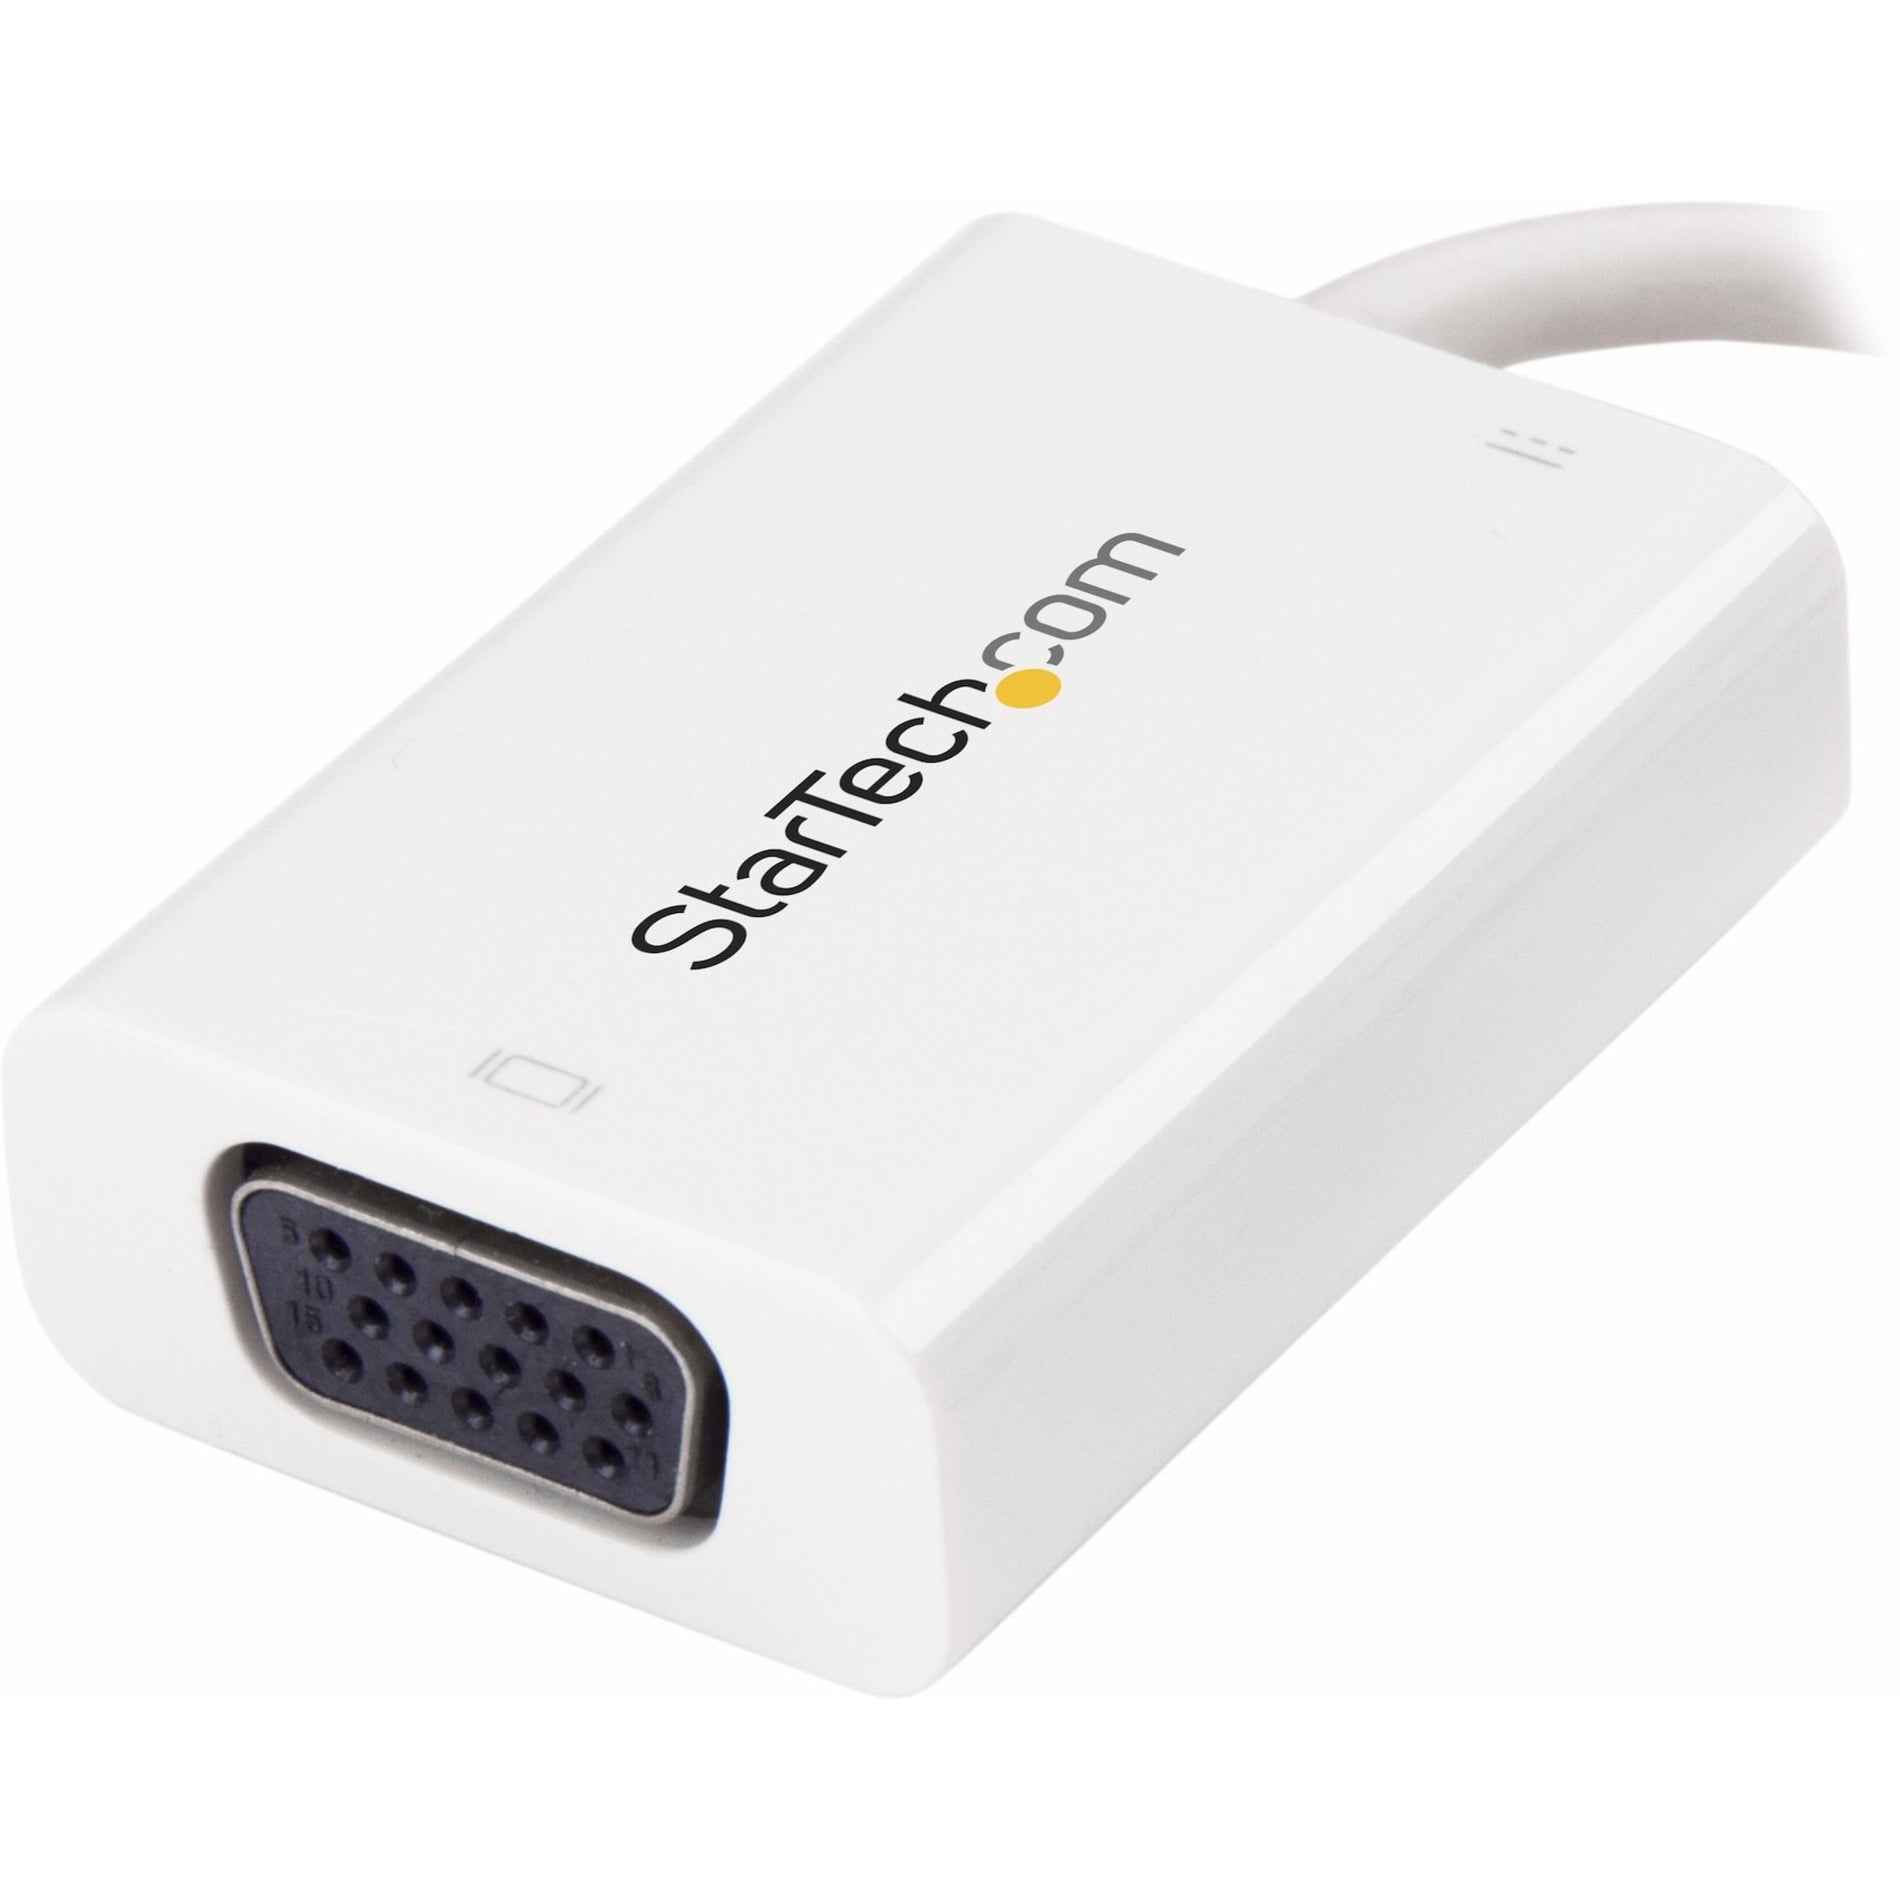 StarTech.com CDP2VGAUCPW USB-C to VGA Video Adapter with USB Power Delivery, Thunderbolt 3 Compatible, 1920 x 1200, White